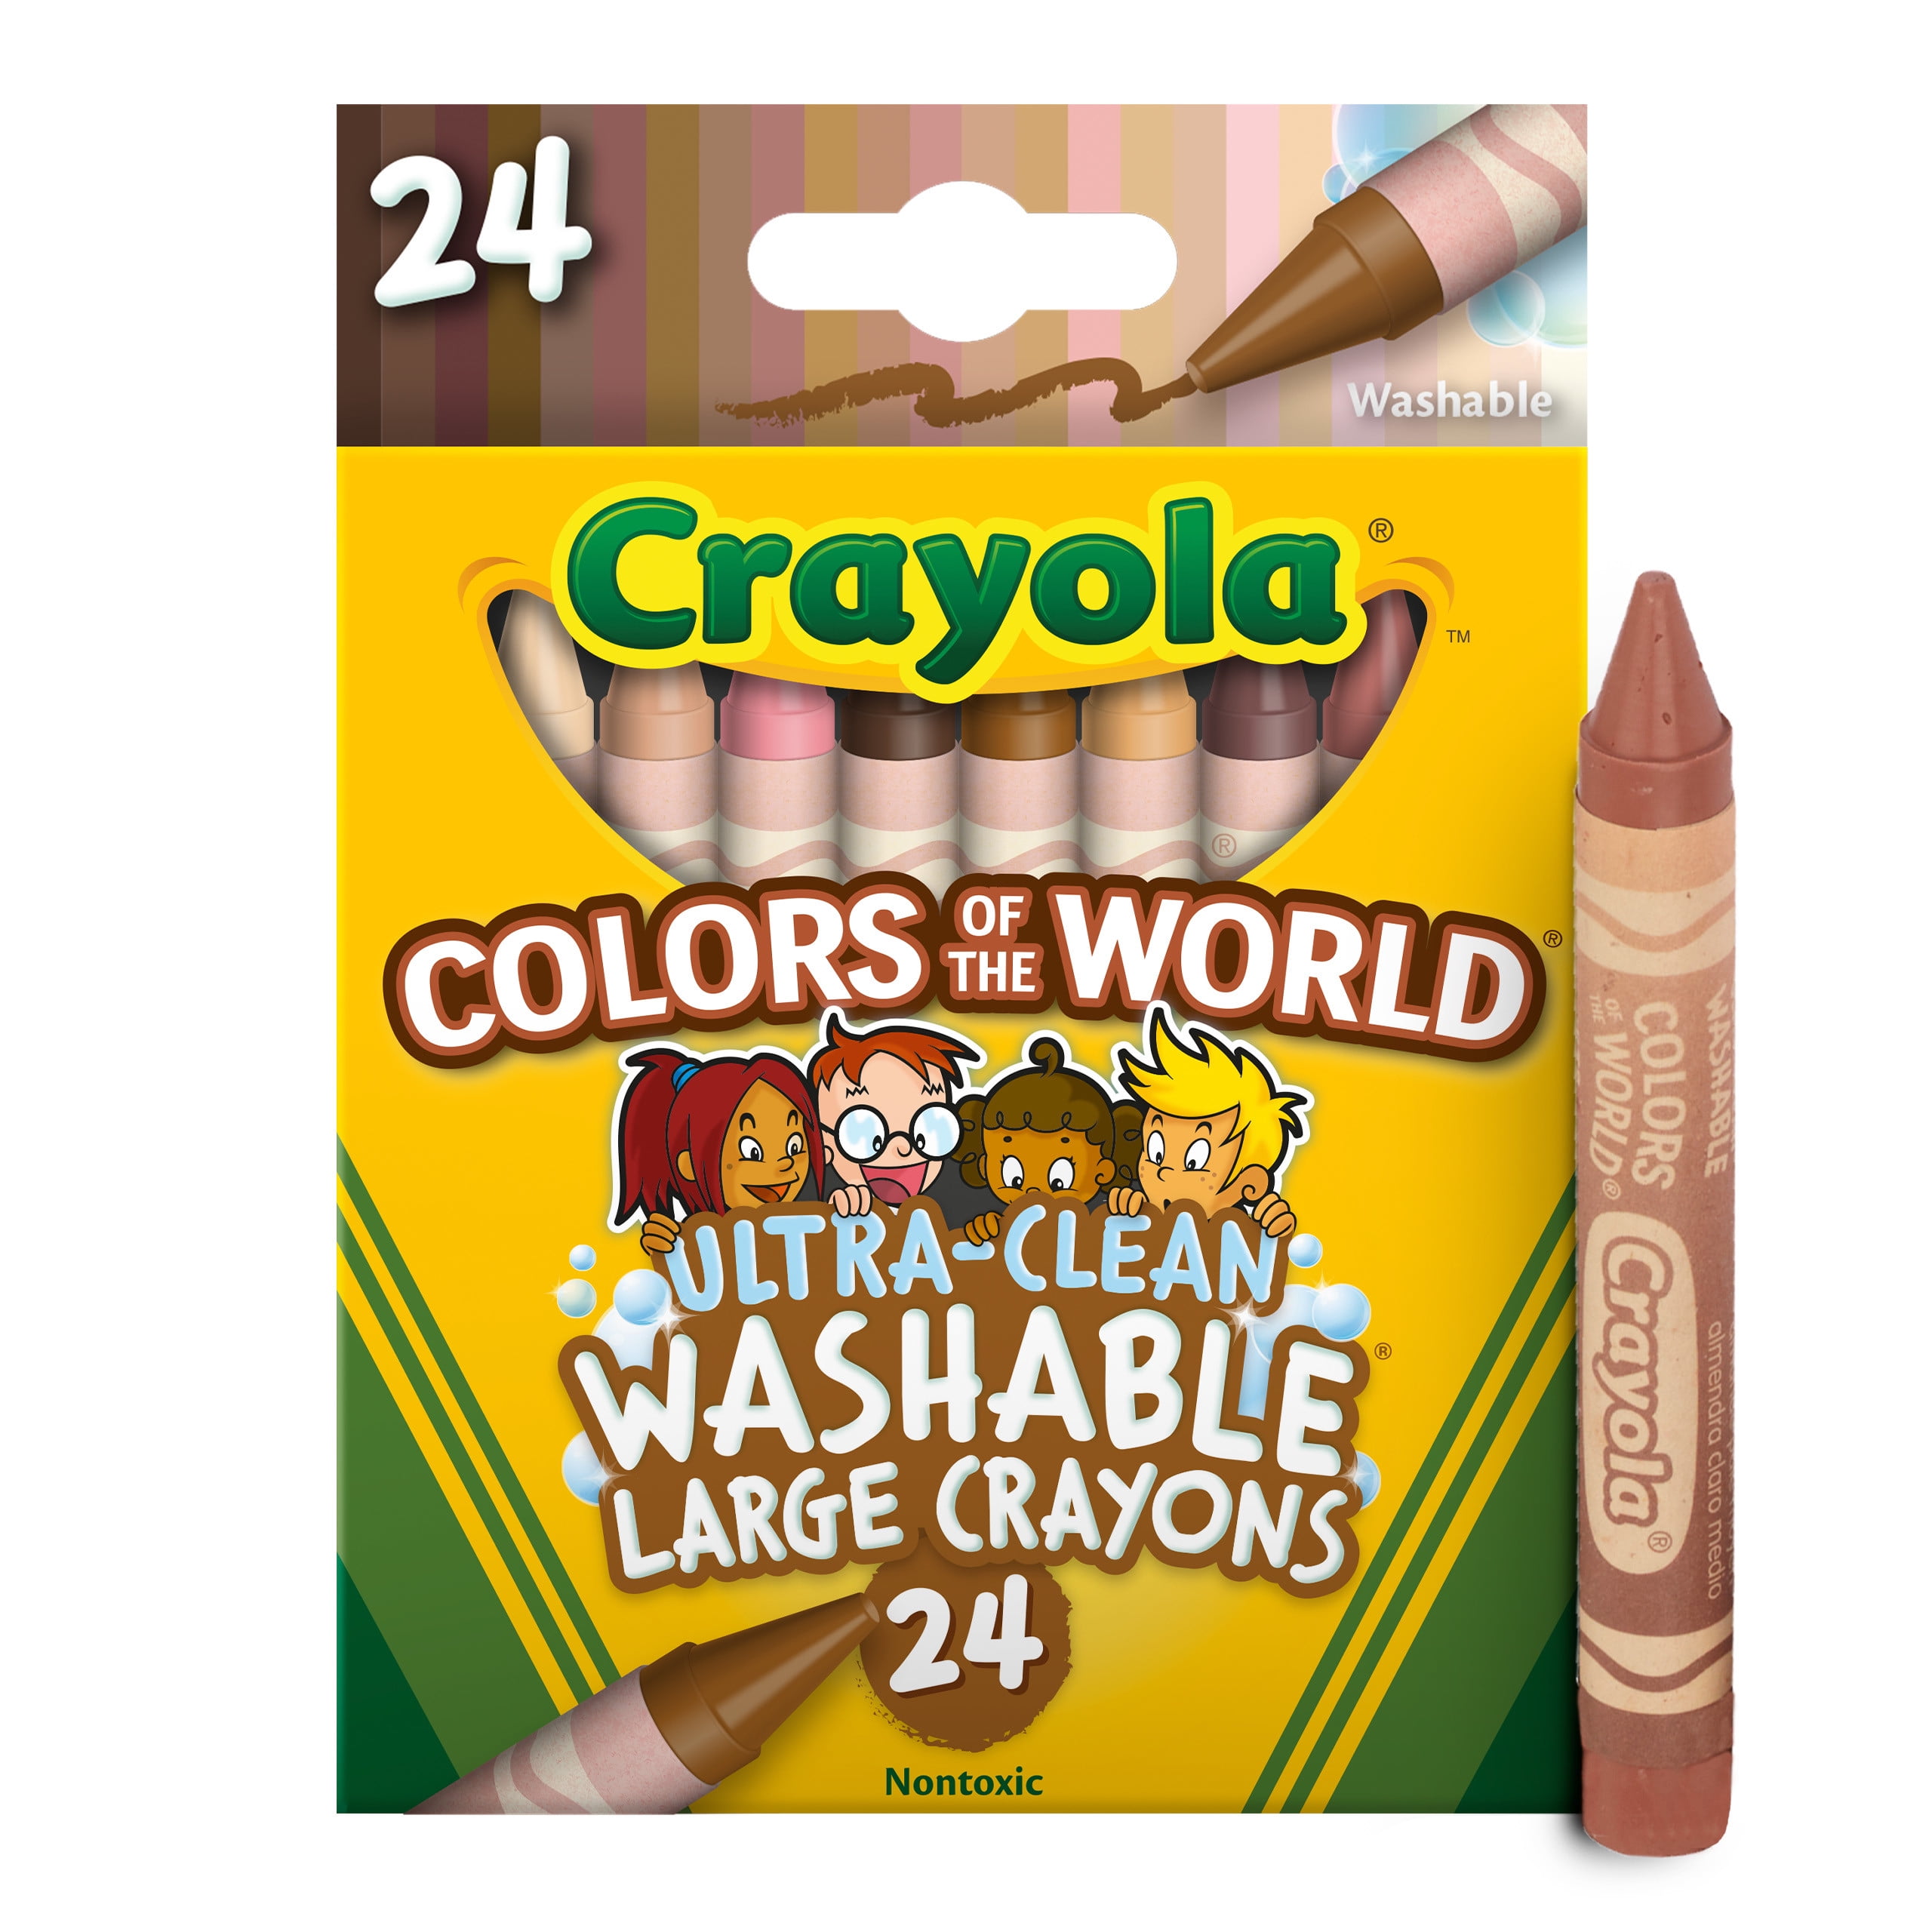 Crayola® World of Colors Crayons - 12 Packs, each 24 Colors